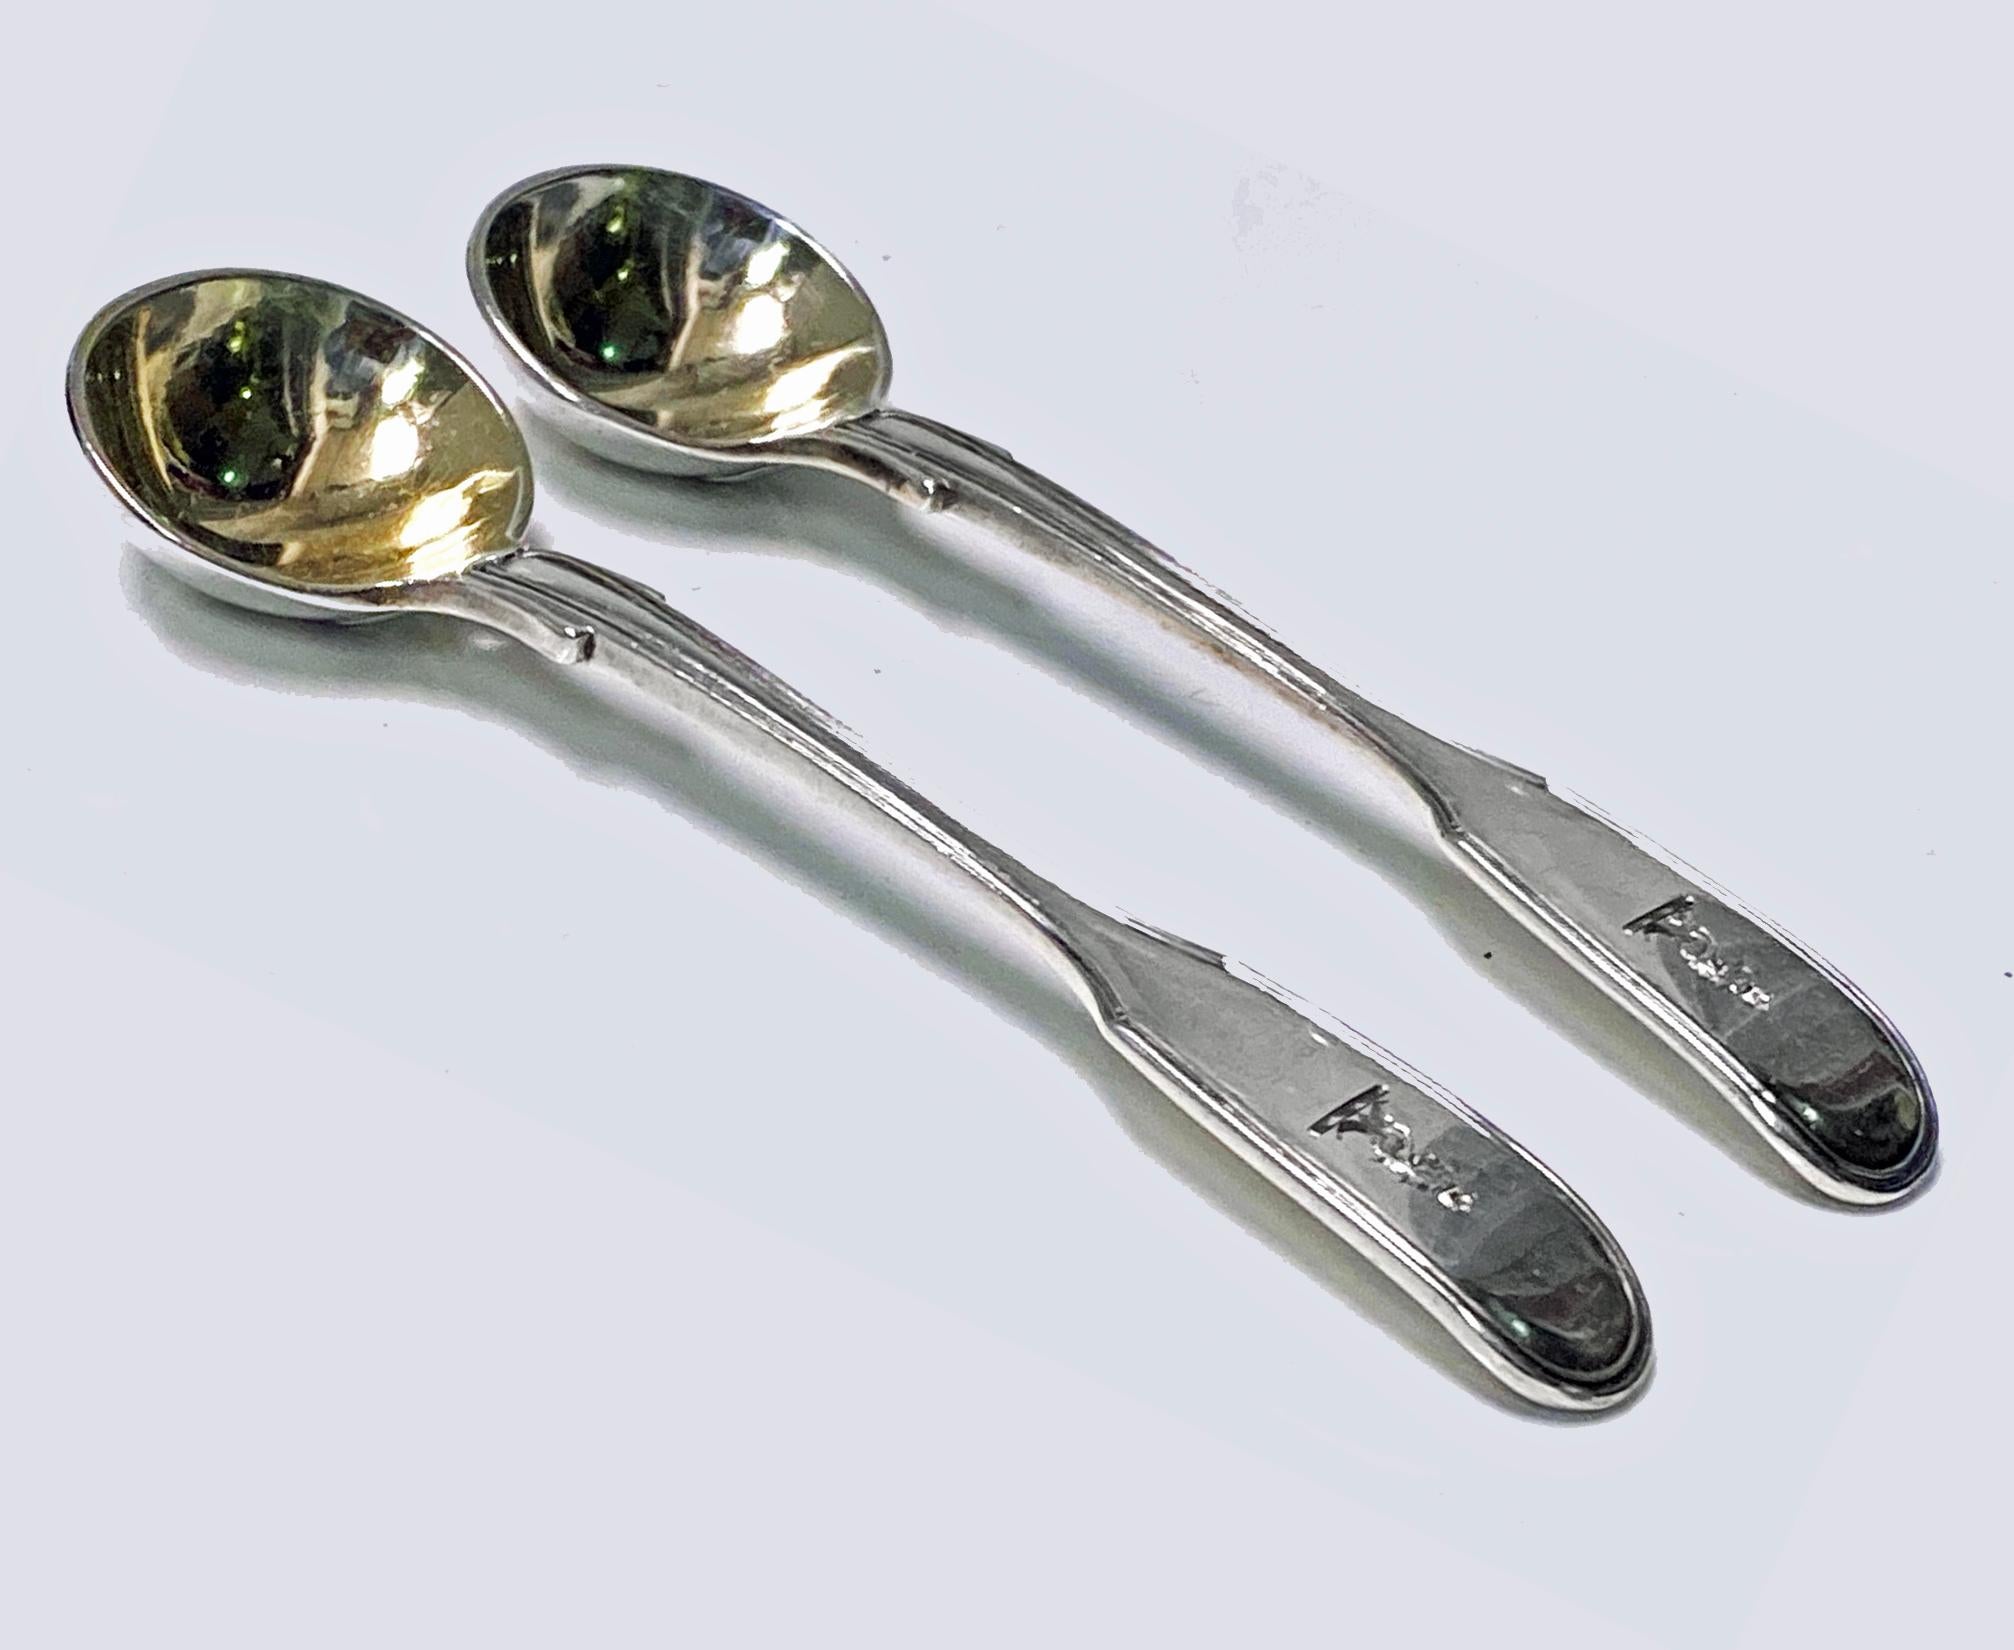 Pair Antique English Silver master Salt Spoons London 1832 Lias Bros. Fiddle pattern, each engraved with crest of lion’s head erased with ducal coronet, gilded bowls. Length: 4.25 inches. Weight: 52.70 grams. Condition: Good. Reflections in bowls